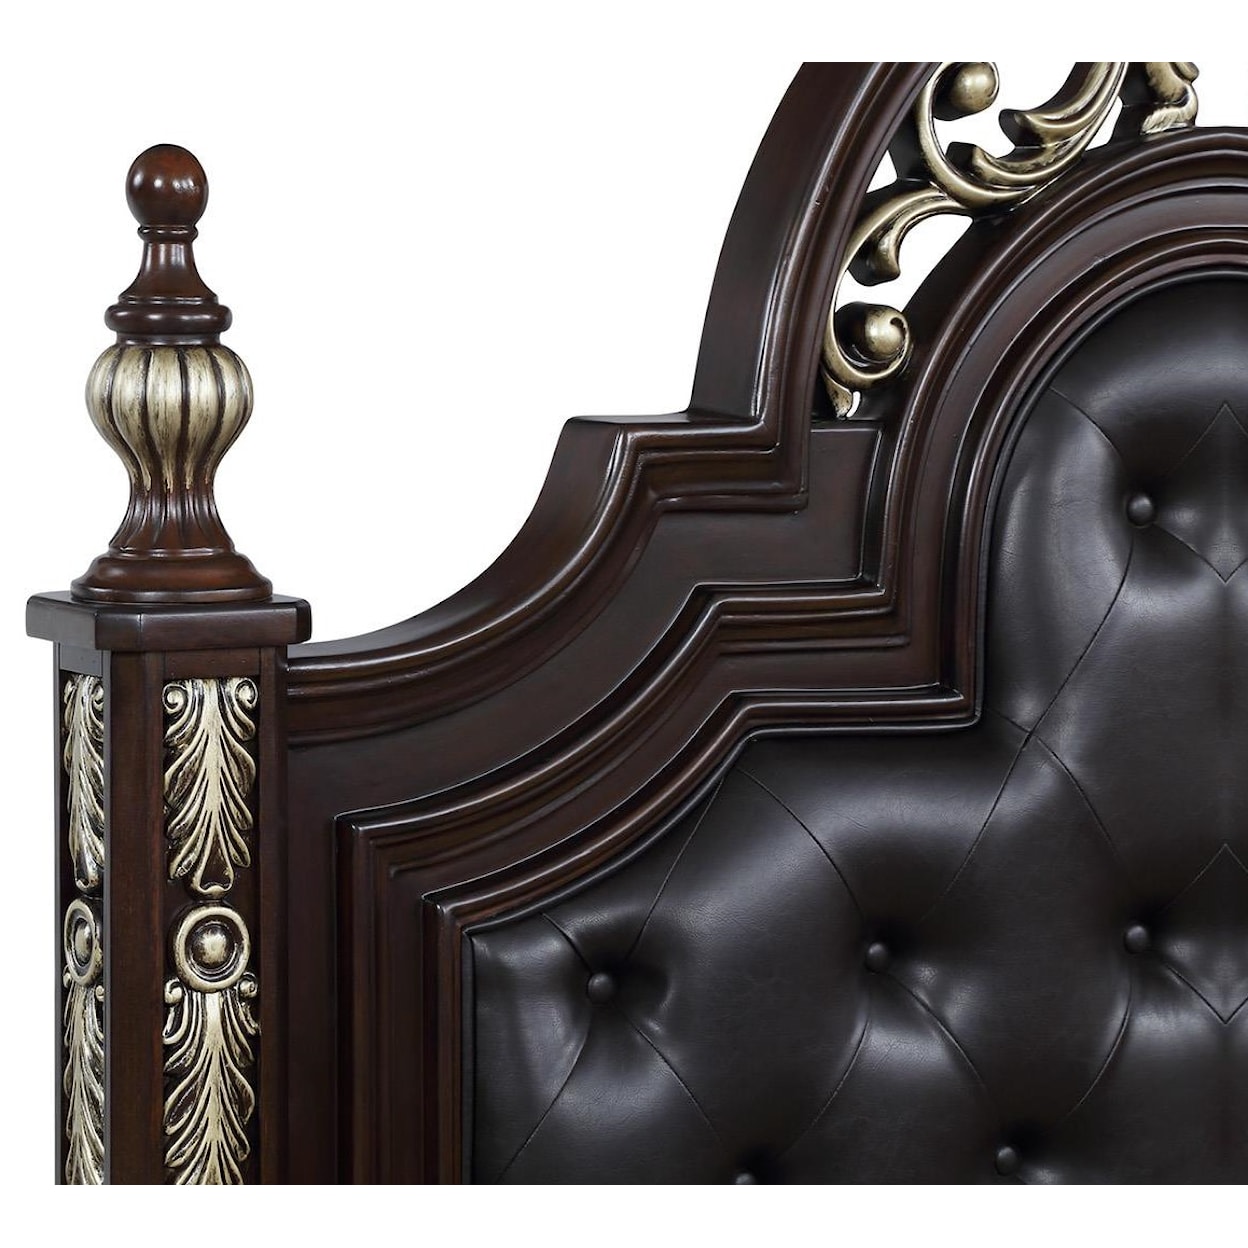 New Classic Maximus Queen Poster Bed with Upholstered Headboard